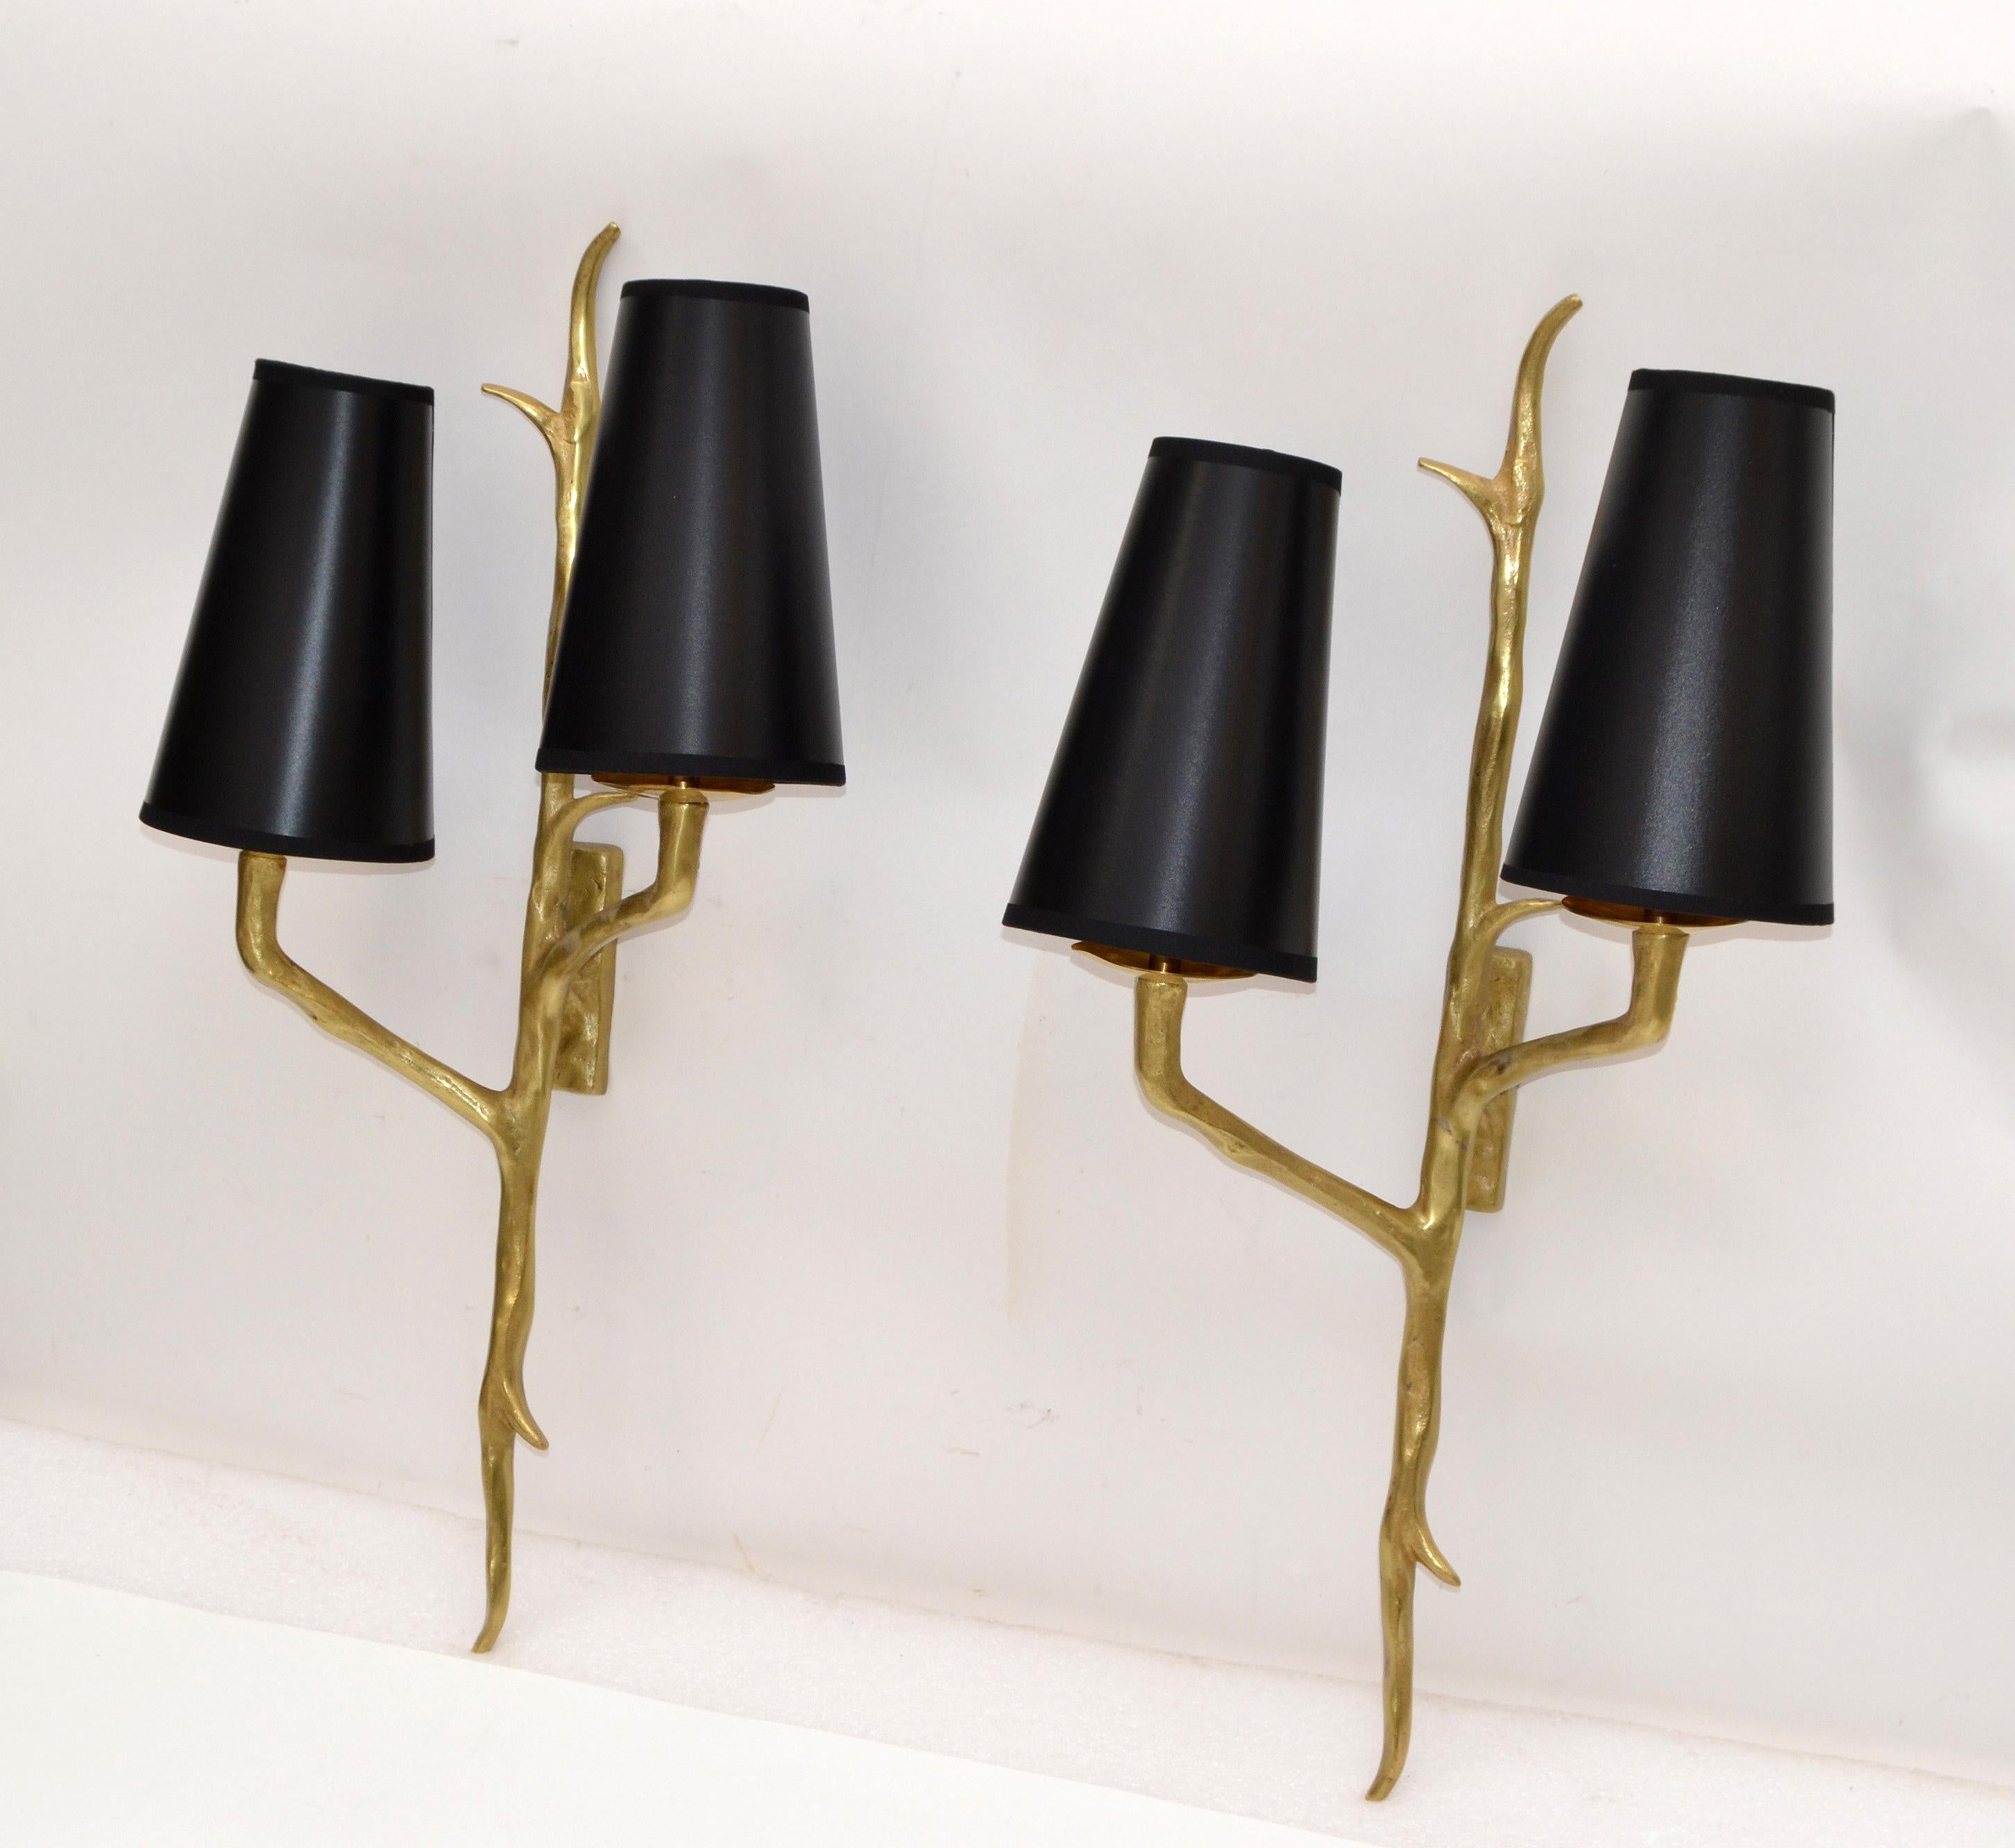 Pair of Agostini Style Sconces Bronze with Black and Gold Shades, France, 1950s For Sale 2